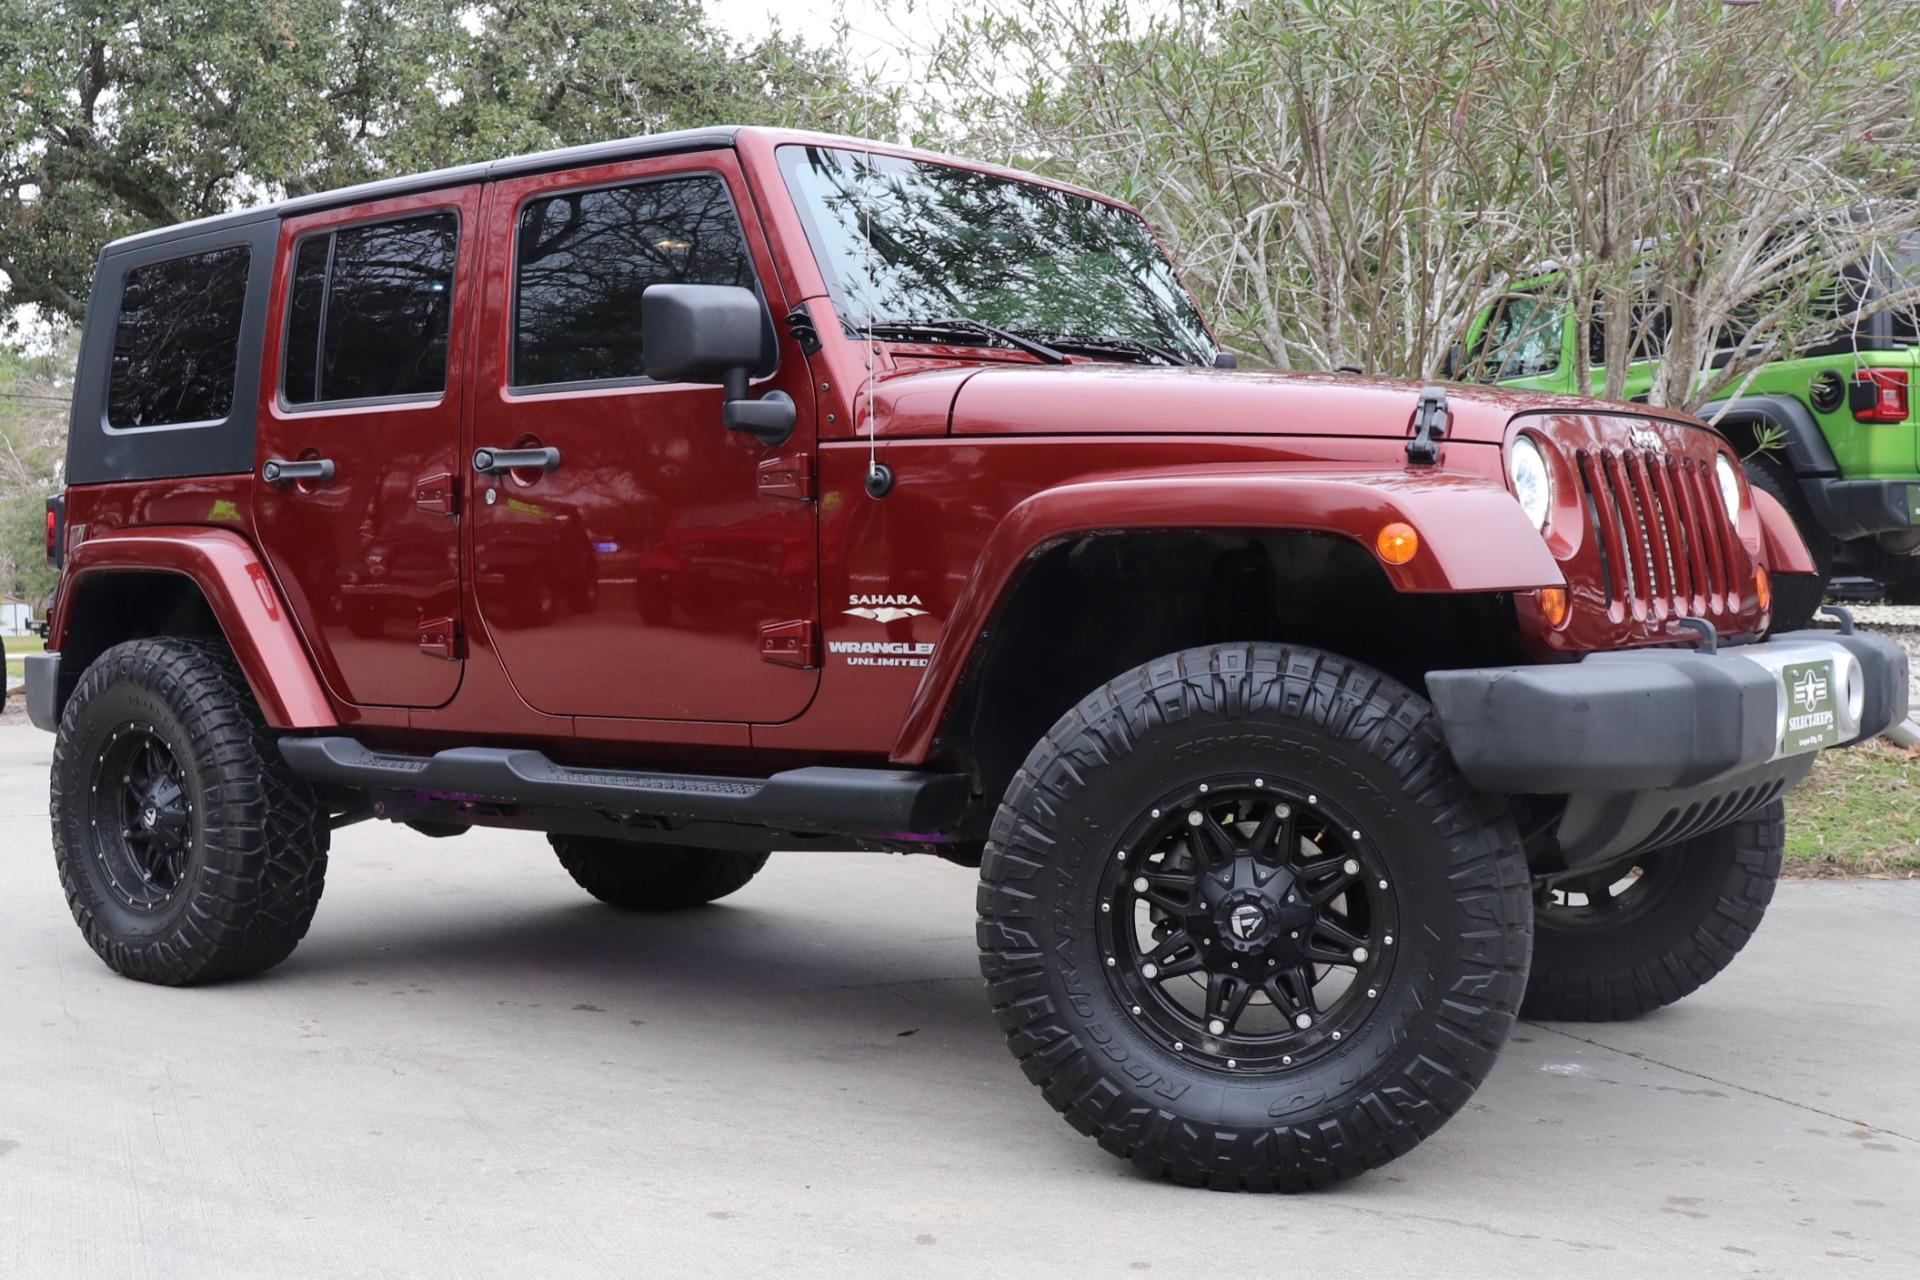 Used 2010 Jeep Wrangler Unlimited Sahara For Sale ($22,995) | Select Jeeps  Inc. Stock #148897